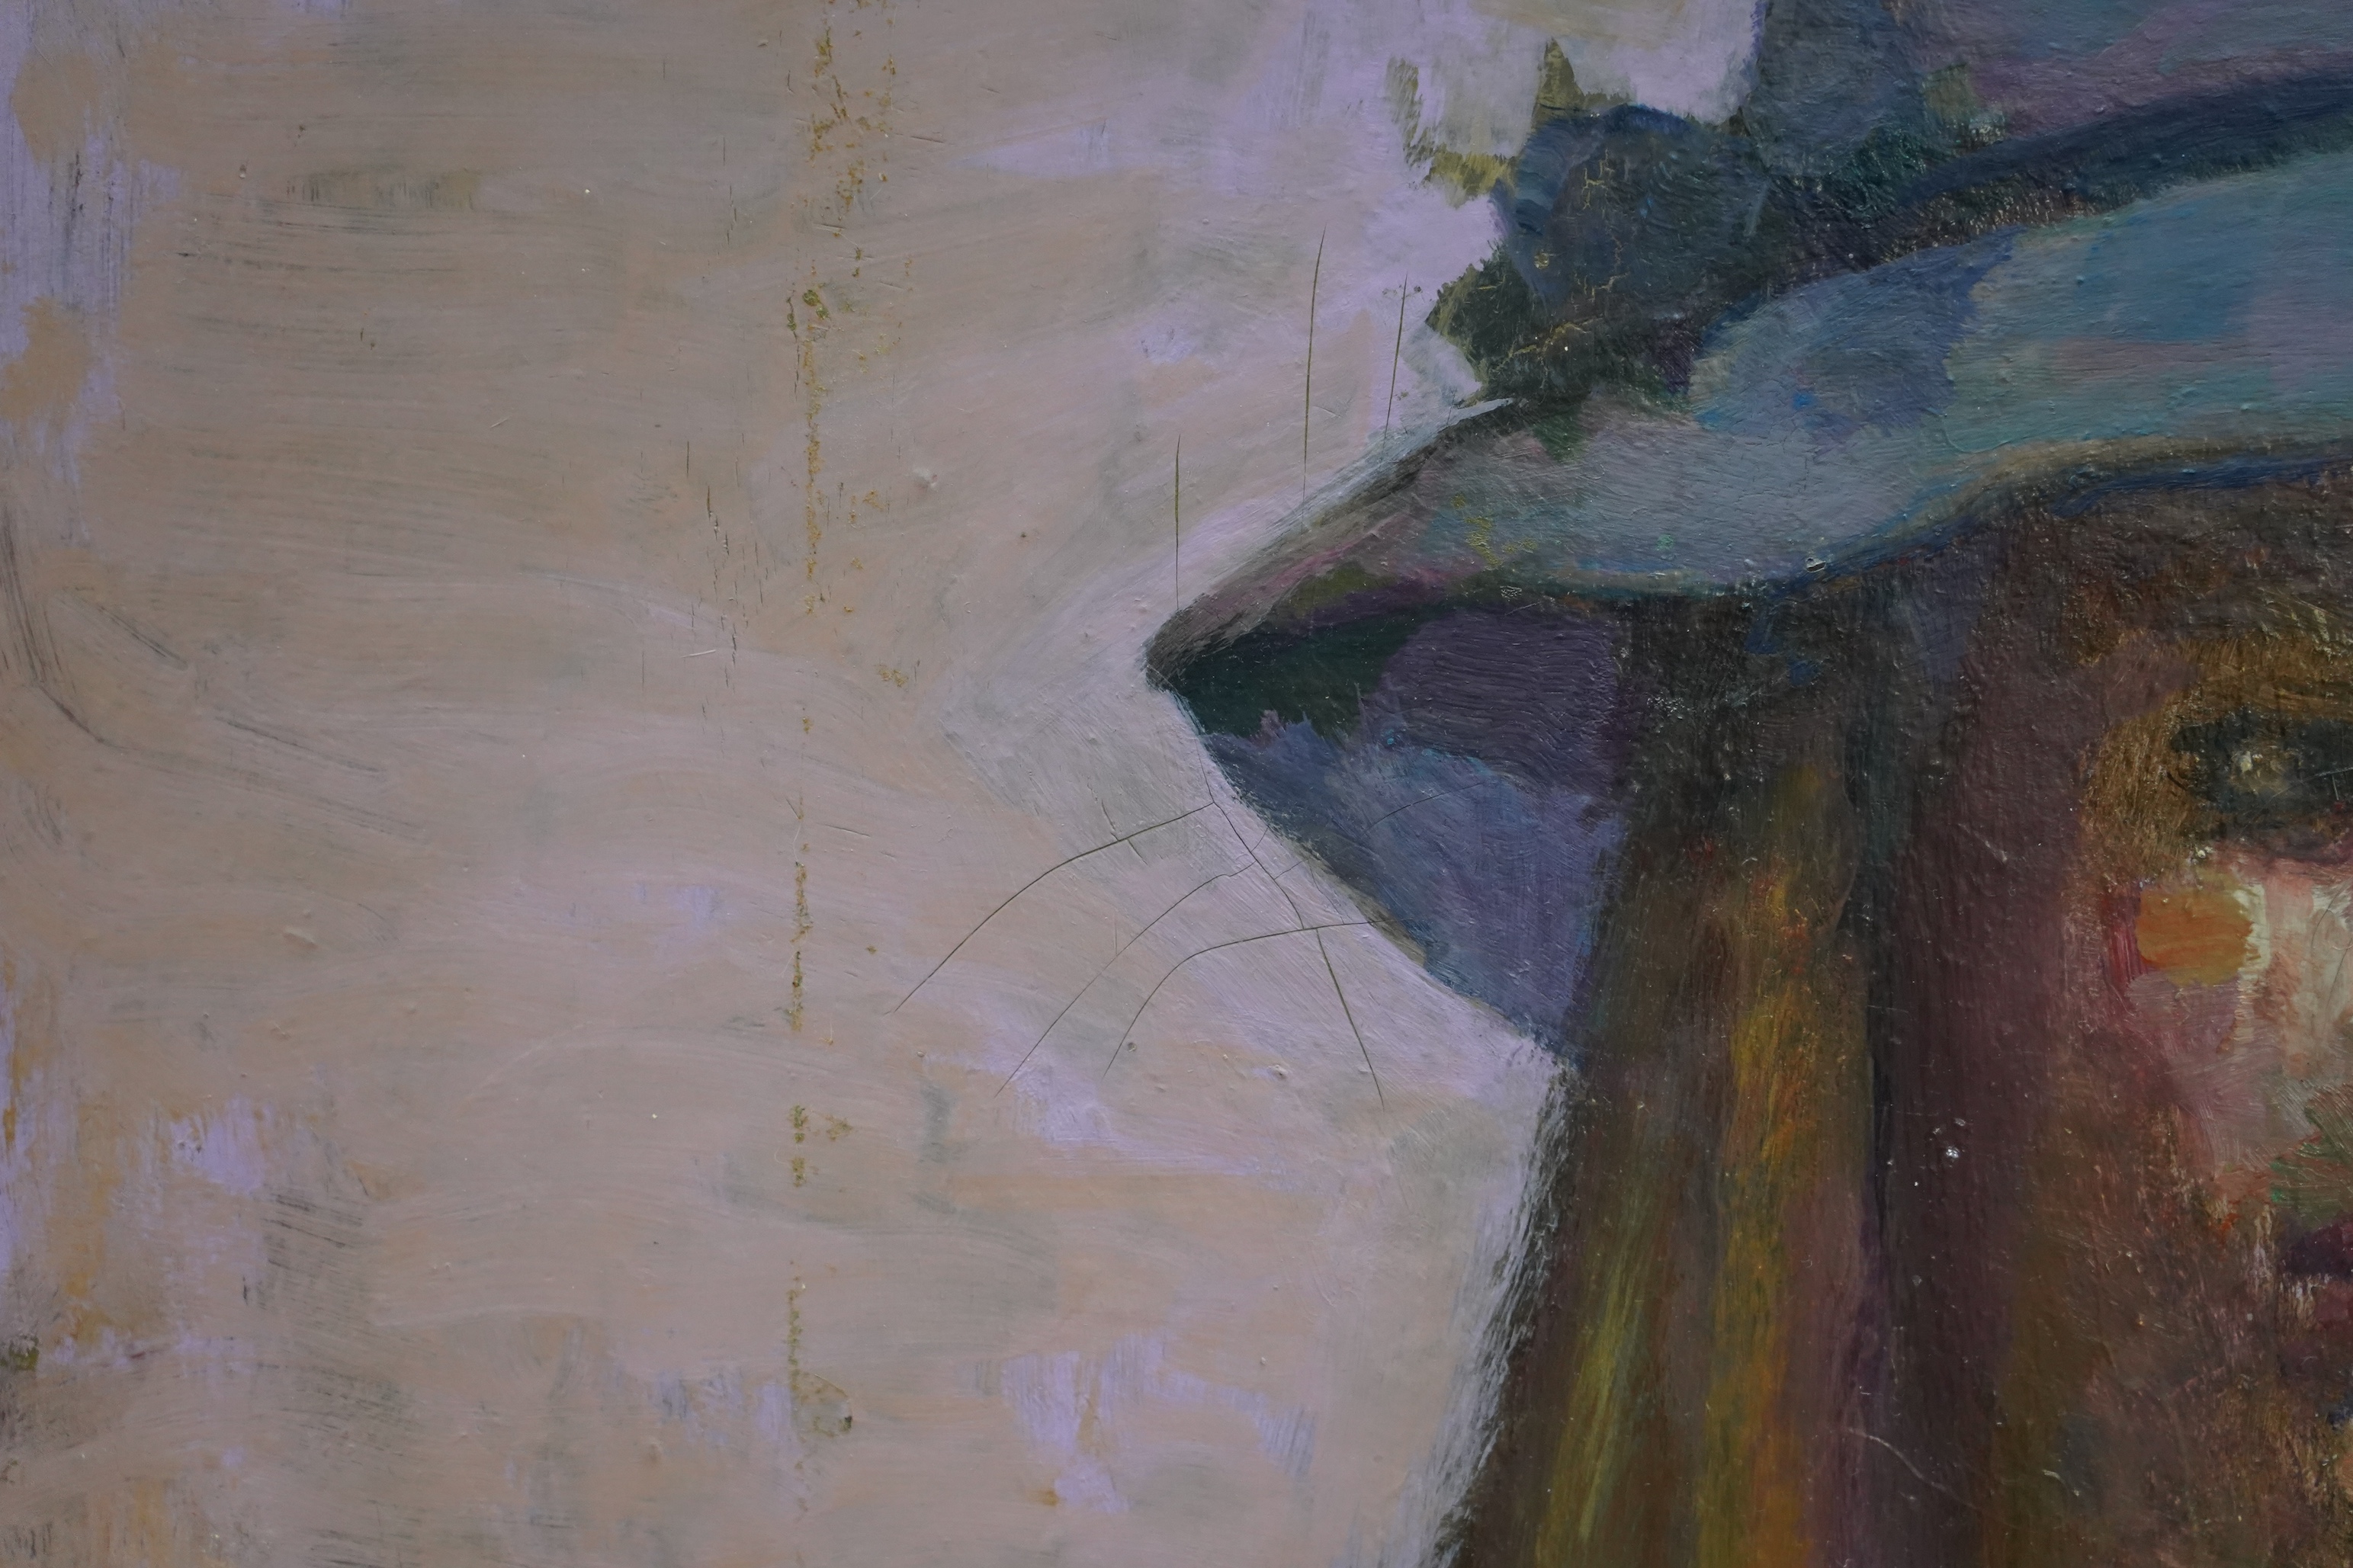 Alex C. Koolman (1907-1998), oil on board, Study of a girl wearing a hat, 50 x 60cm. Condition - good, some scratching